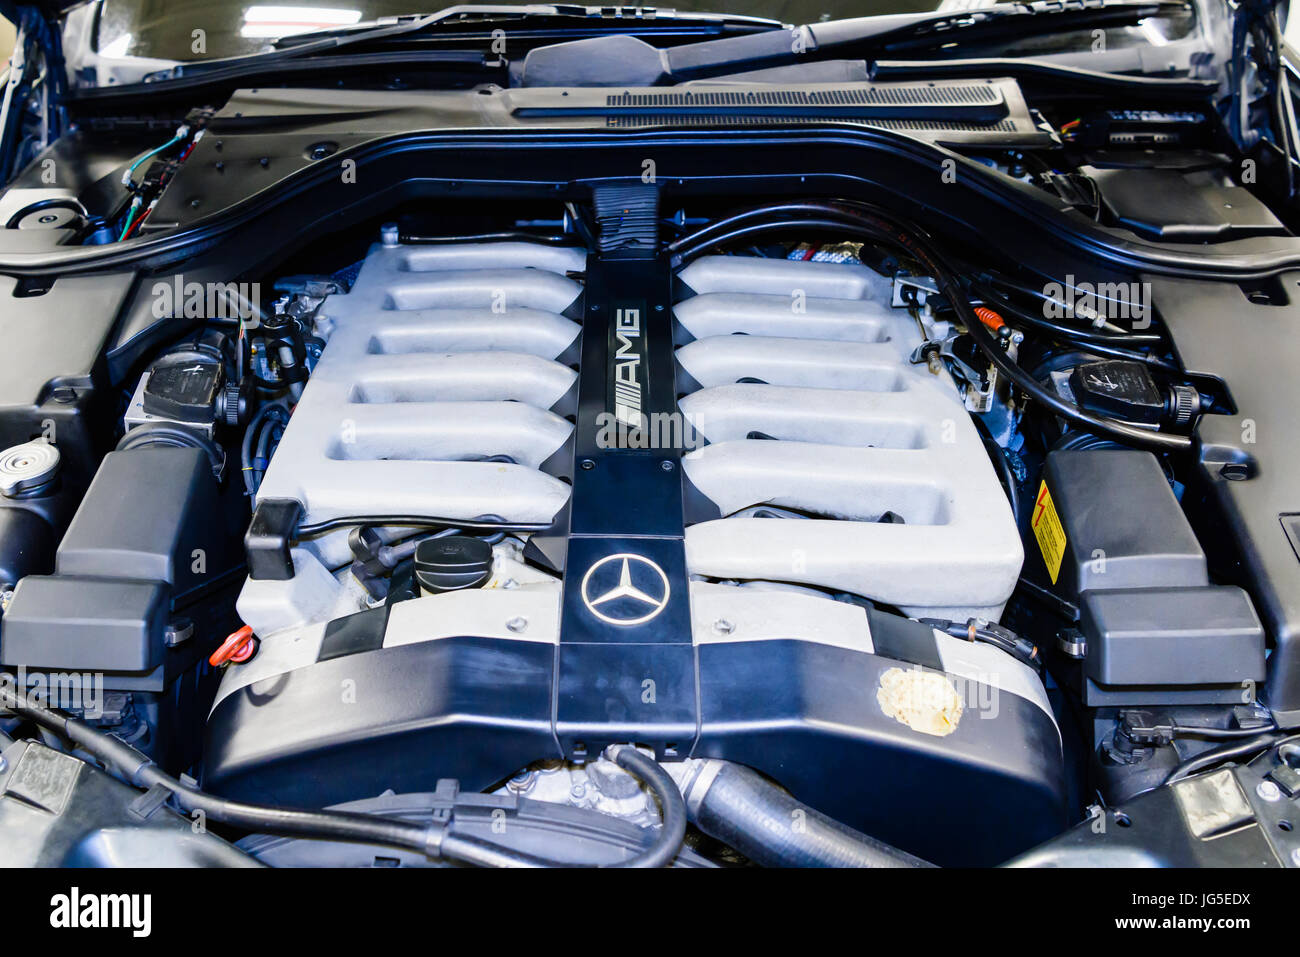 AMG V12 engine in a 140 series Mercedes S70 (1996, 1997, 1998), generating over 500bhp. Stock Photo